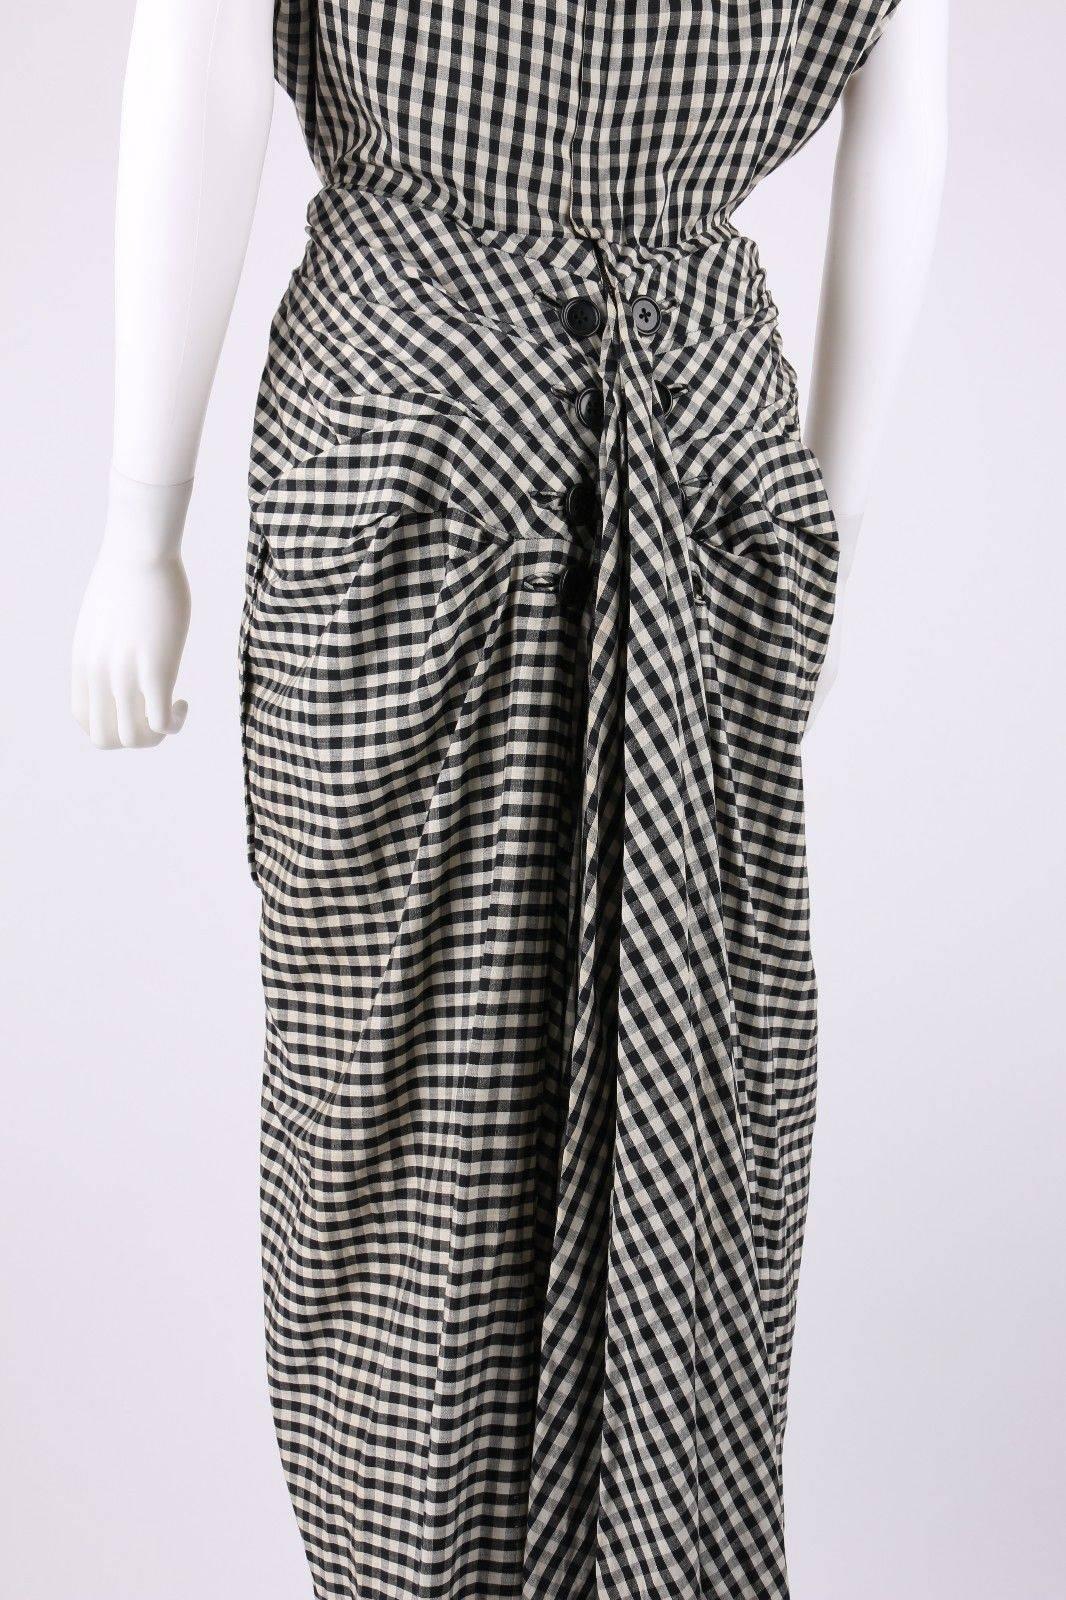 1949 S/S JACQUES FATH Black & White Gingham Fan Back Peplum Afternoon Dress In Good Condition For Sale In Thiensville, WI